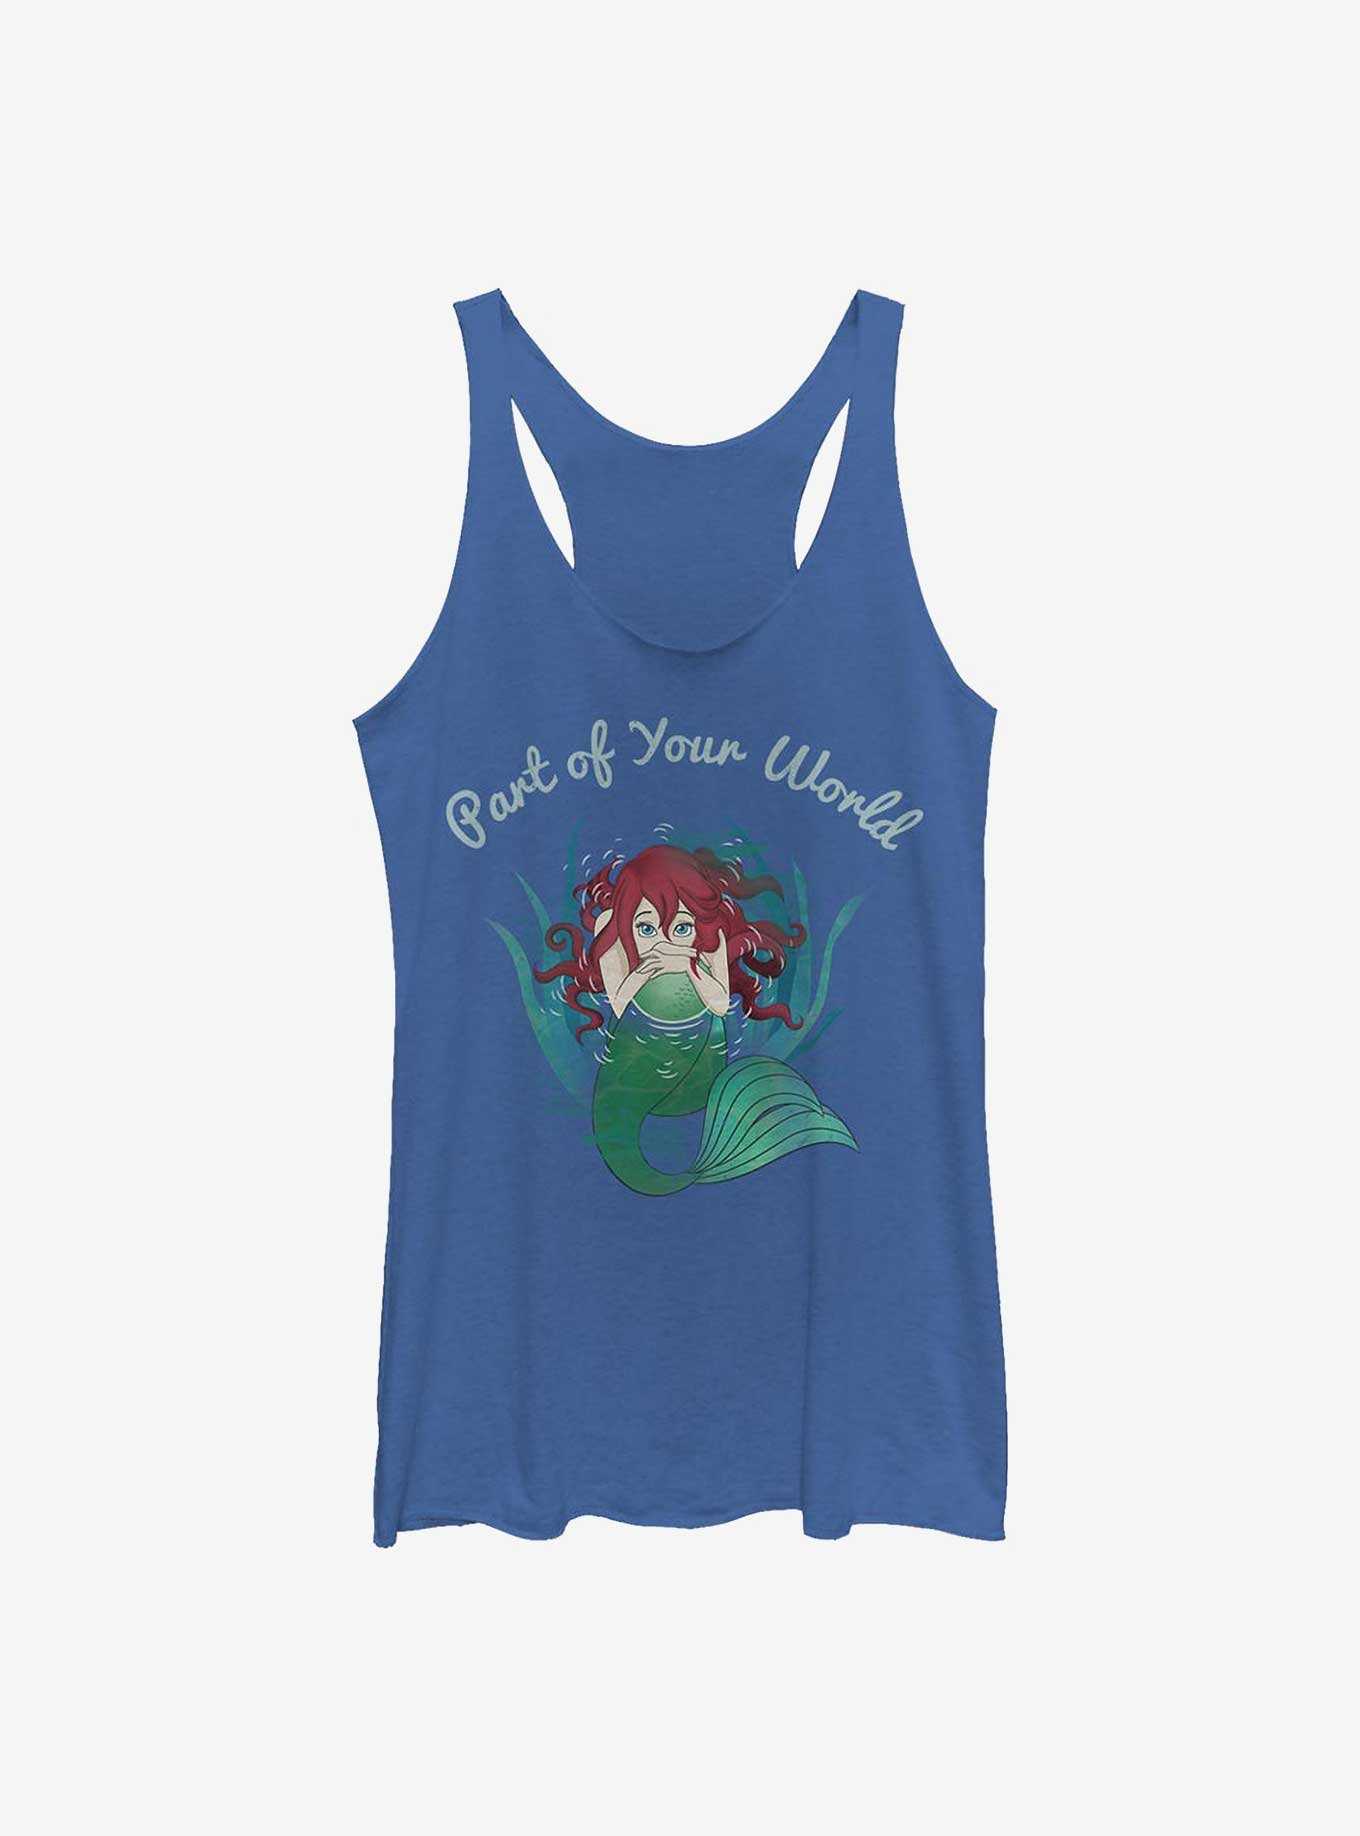 Disney The Little Mermaid Part Of Your World Girls Tank, , hi-res